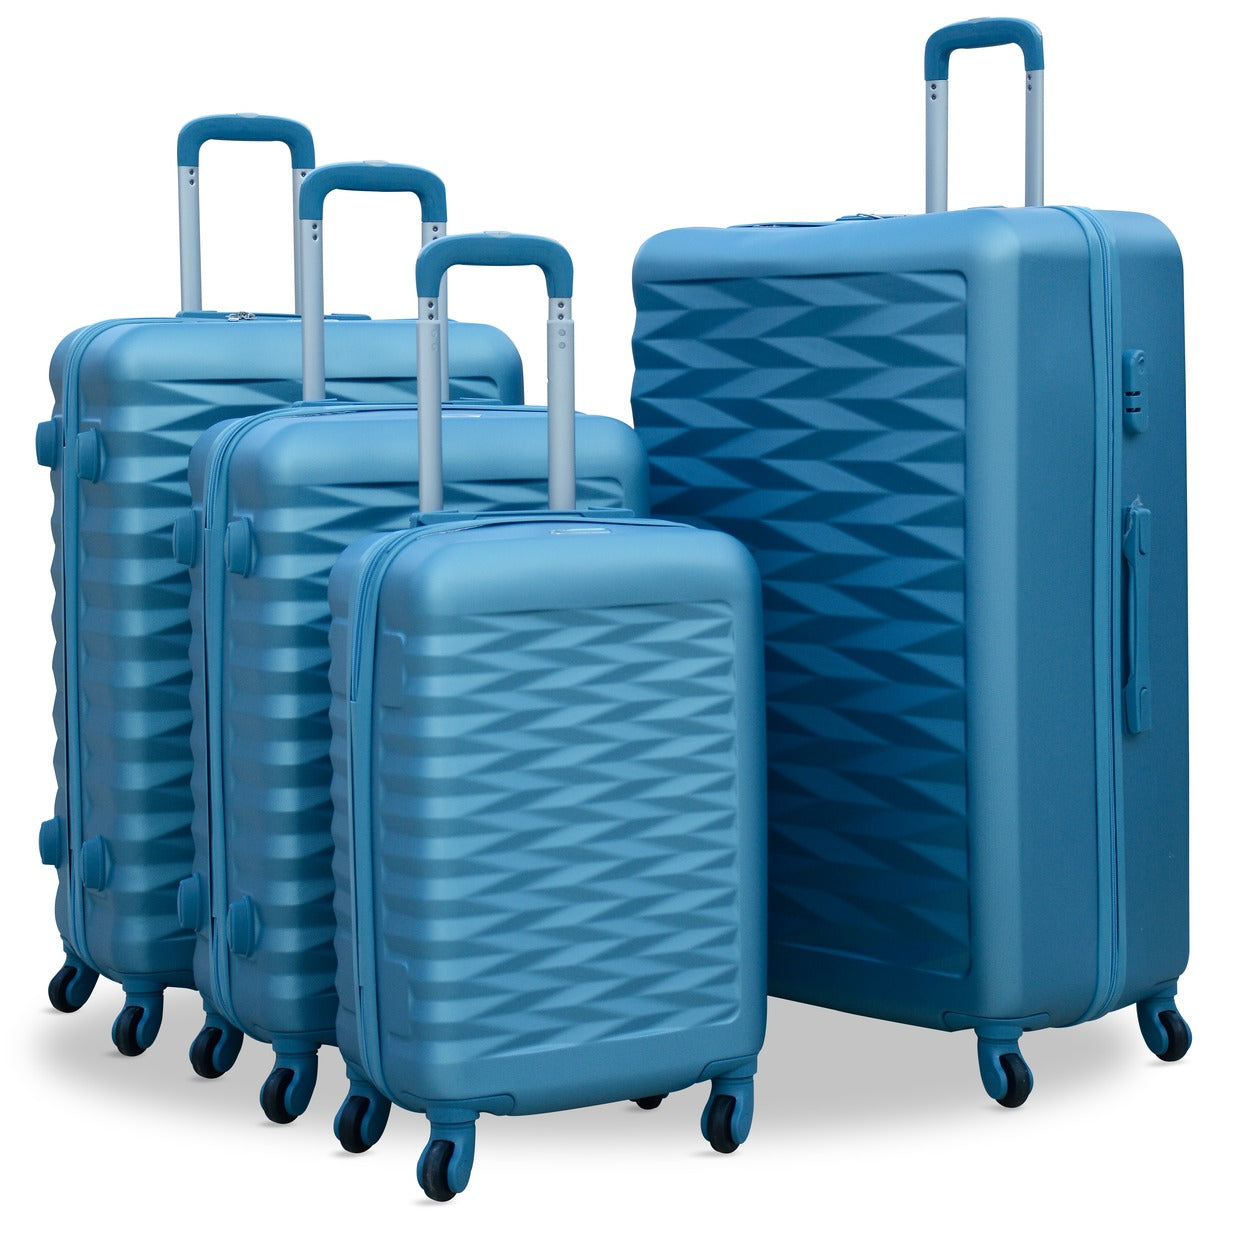 4 Pcs Set 20"24"28"32 Inches Blue Lightweight ABS Luggage Hard Case Trolley Bag | 2 Years Warranty | ASD Lightweight Luggage